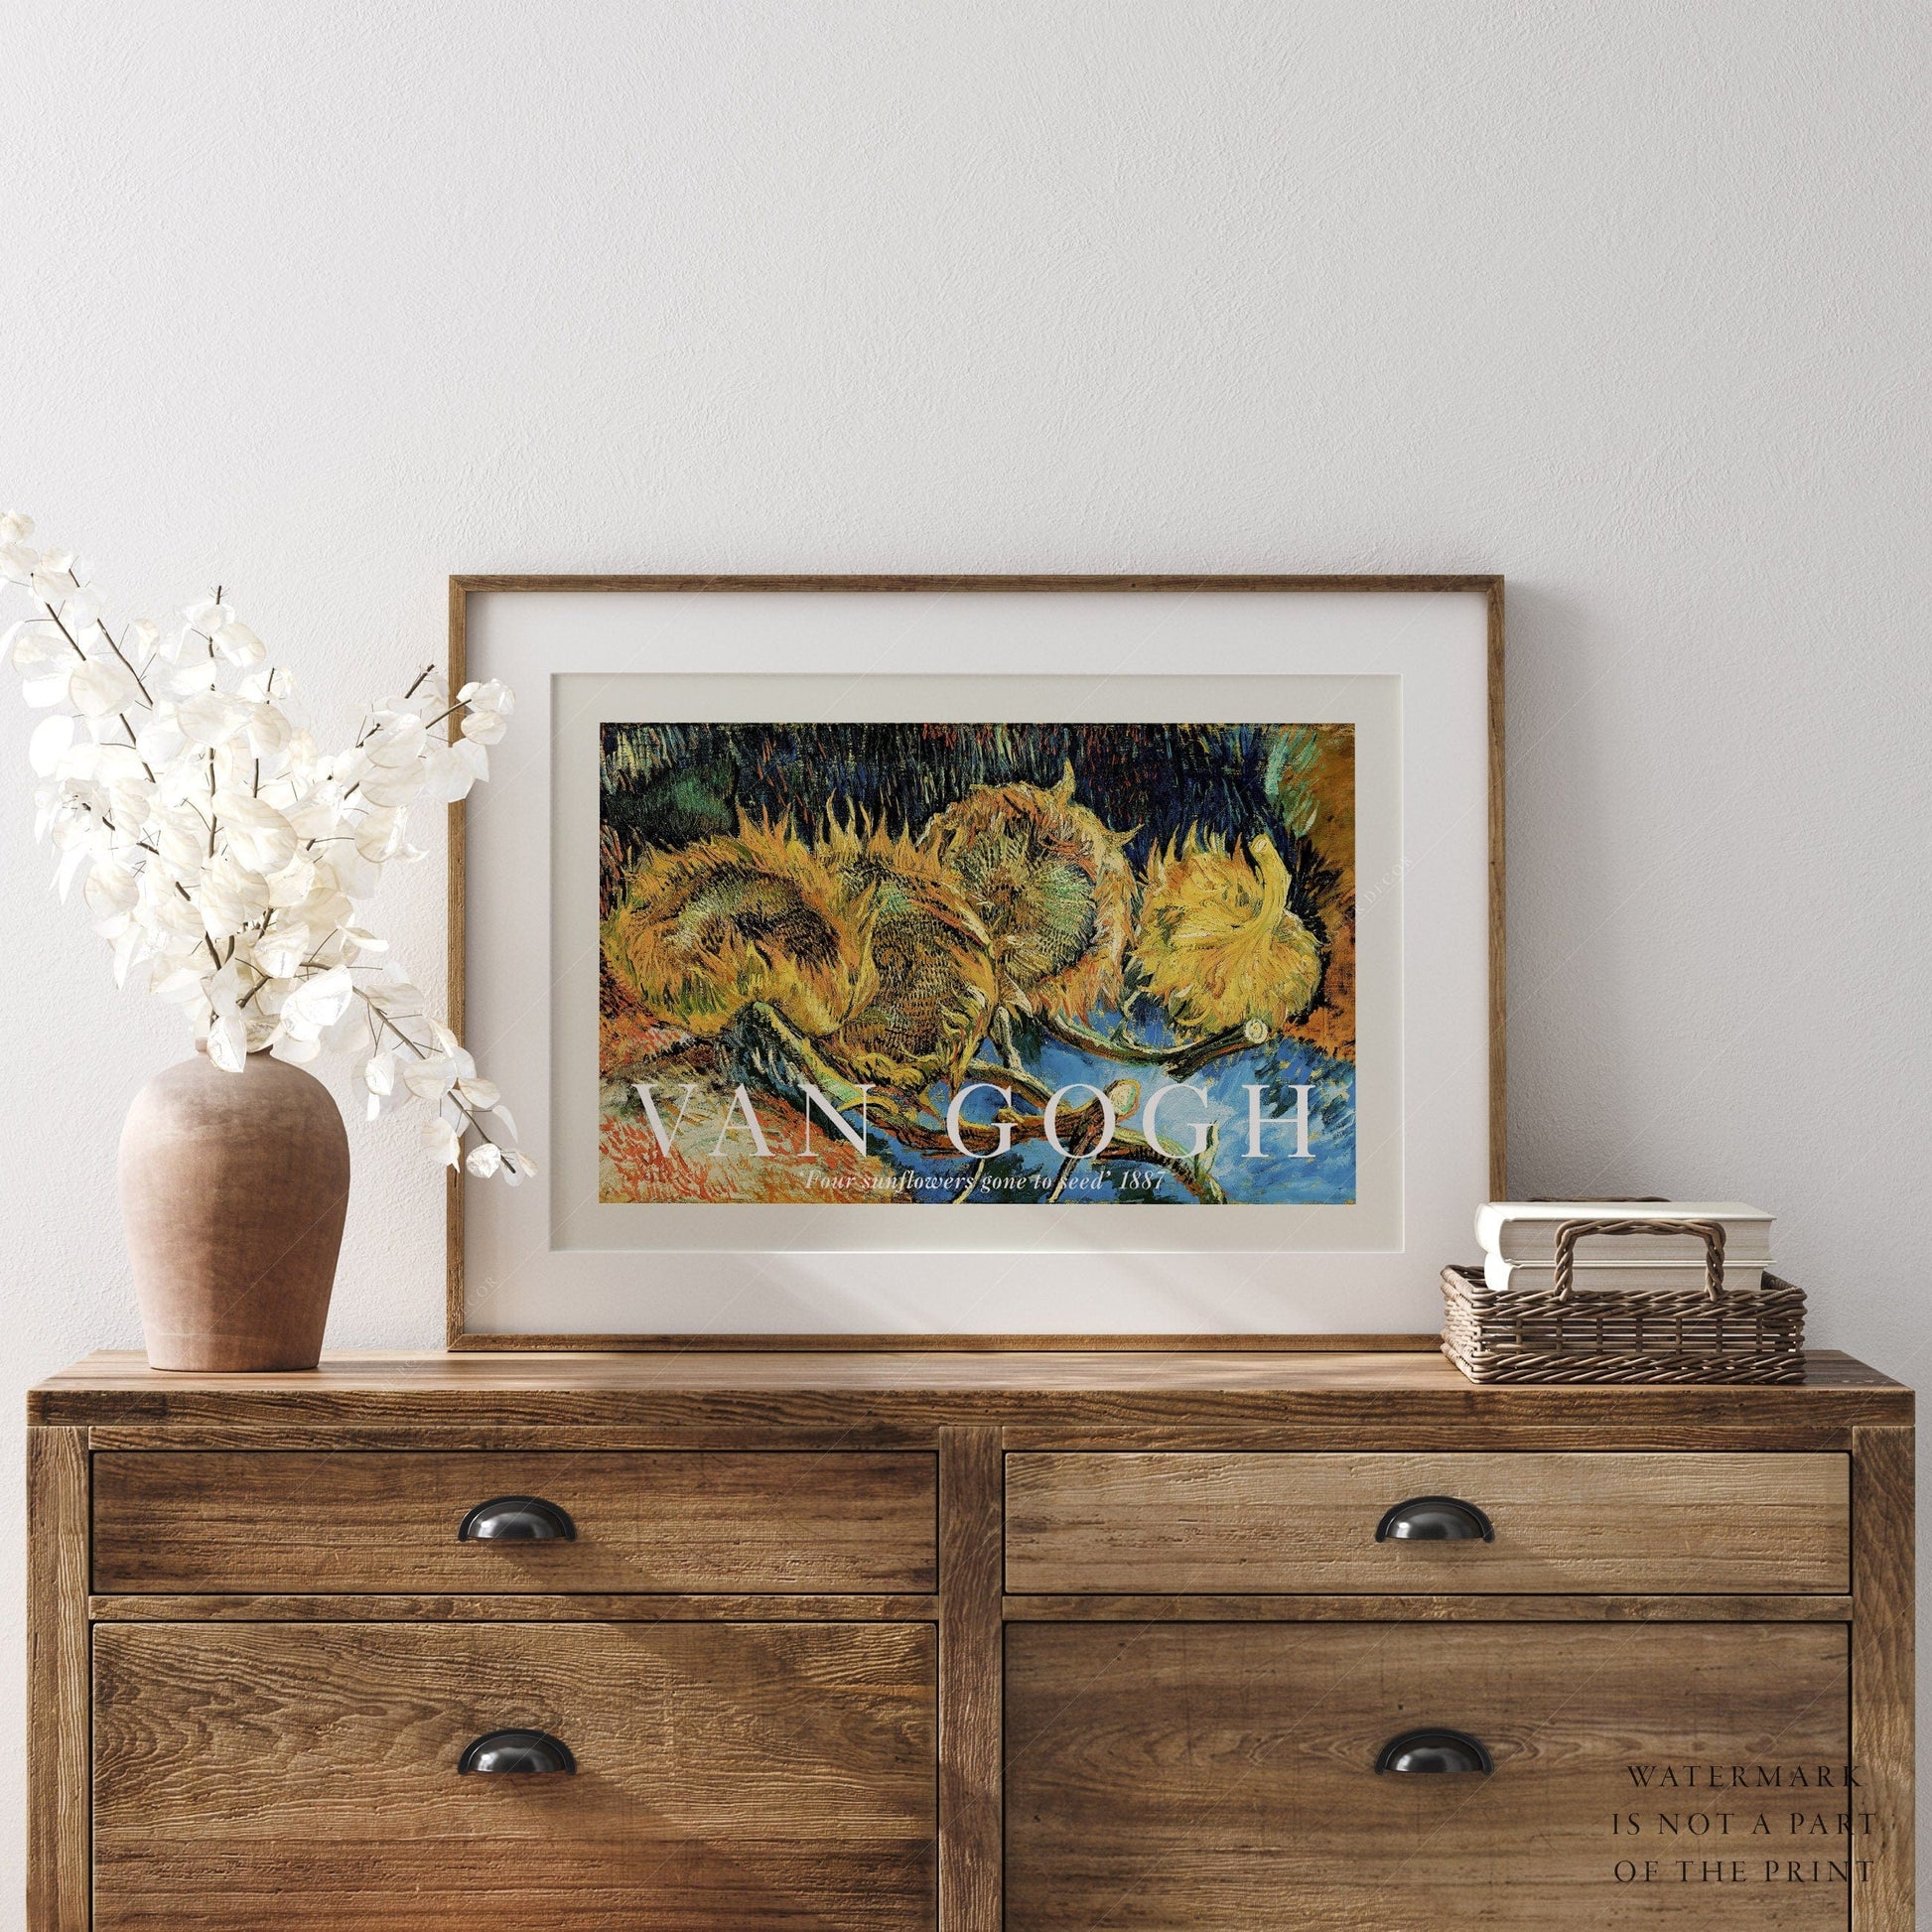 Home Poster Decor Van Gogh Print, Four sunflowers gone to seed, Landscape Art, Impressionist painter, Wedding Gift, Bedroom Wall Decor, Van Gogh Reproduction